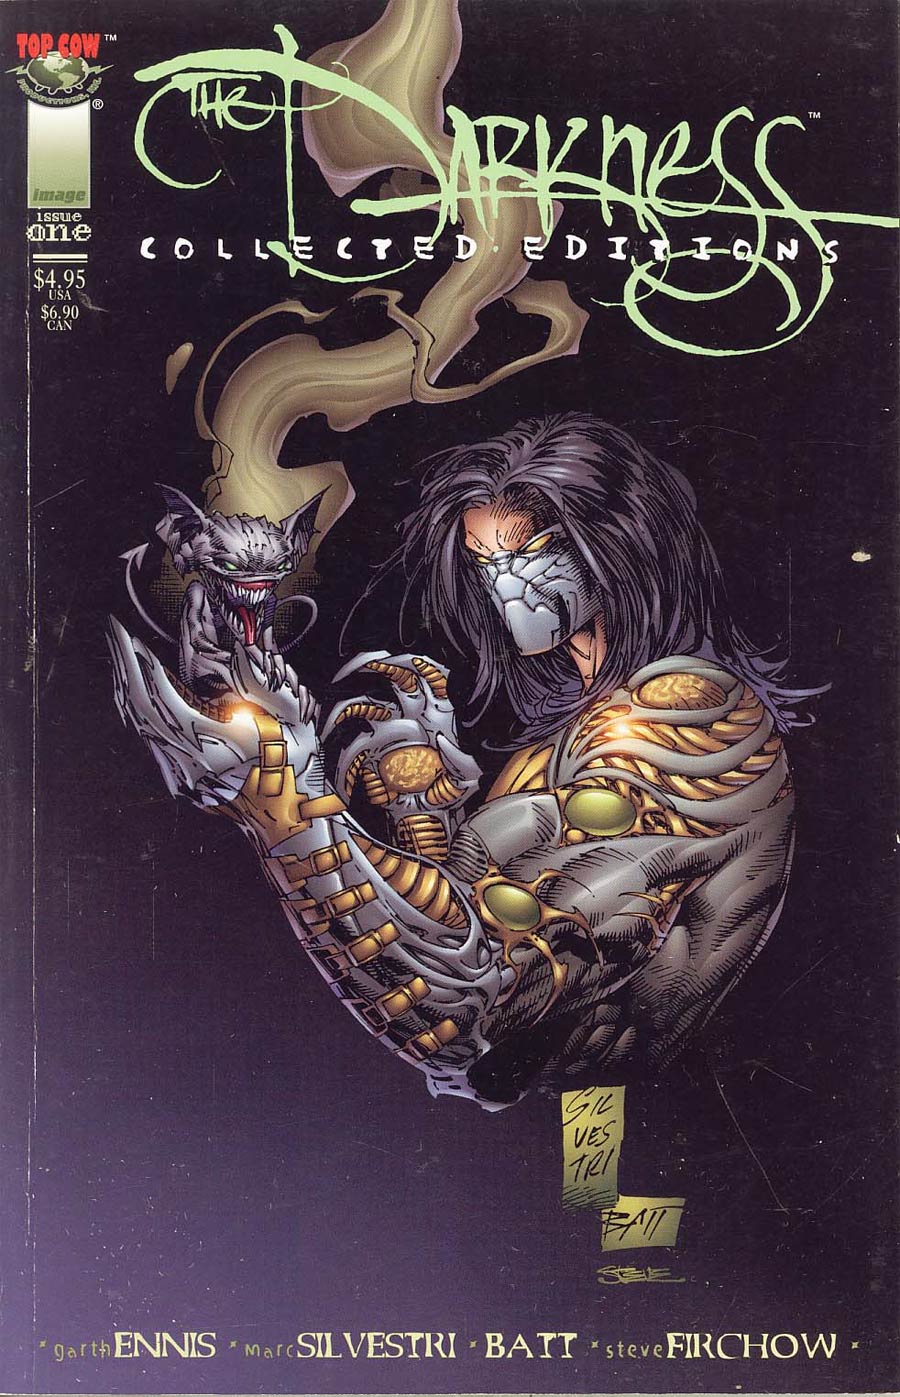 Darkness Collected Editions #1